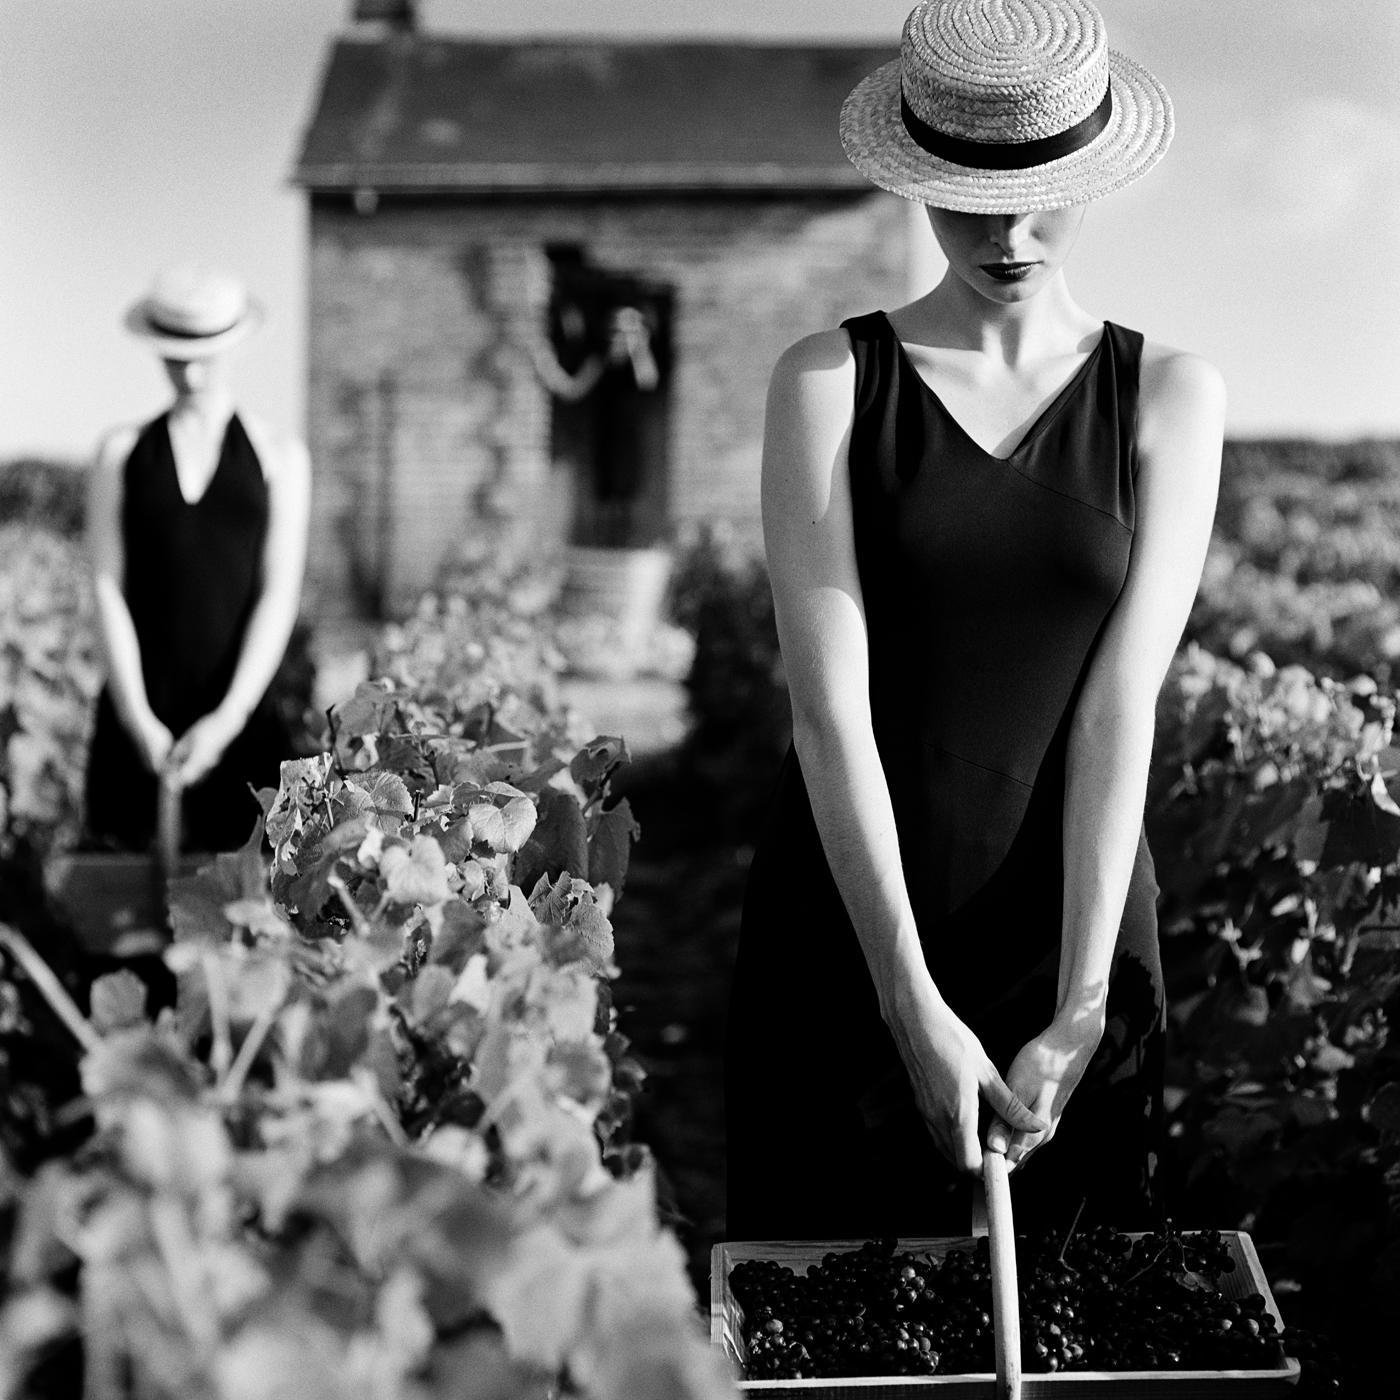 Rodney Smith Figurative Photograph - Women with baskets in Vineyard, Reims, France - 20 x 20 inches